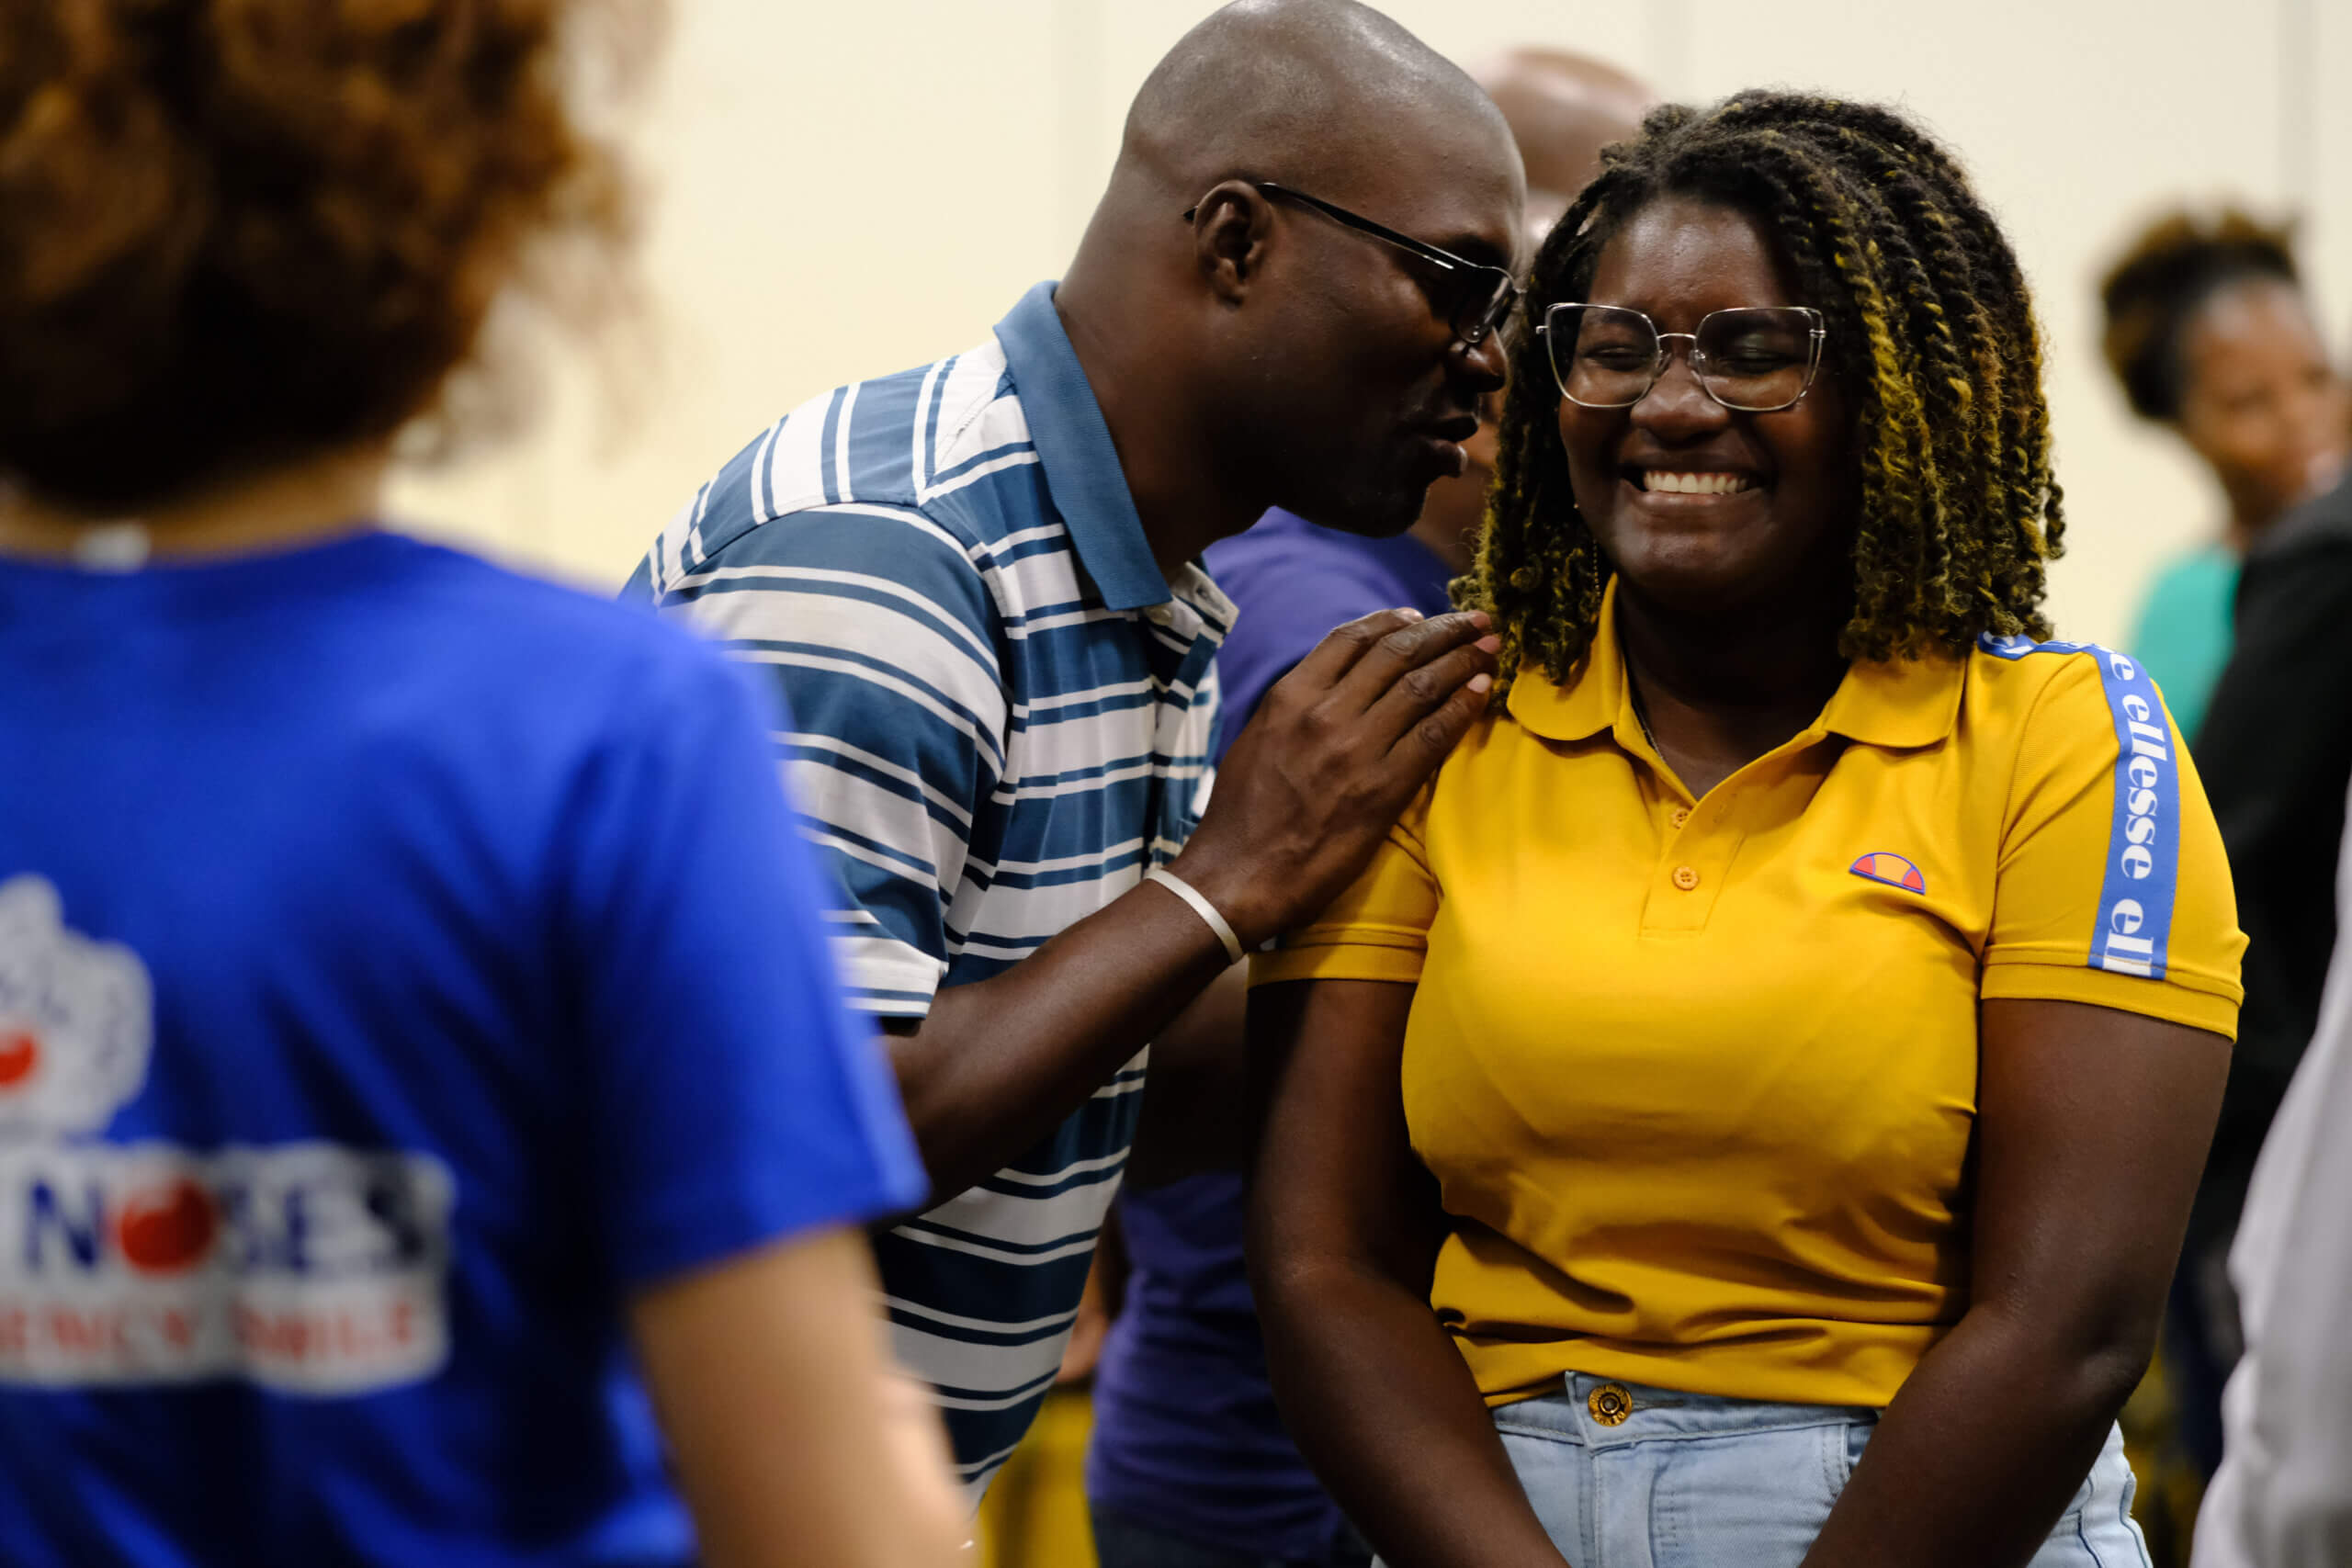 A woman is pictured laughing, wearing a yellow polo shirt, while a man wearing glasses and a blue and white striped top whispers into her ear.